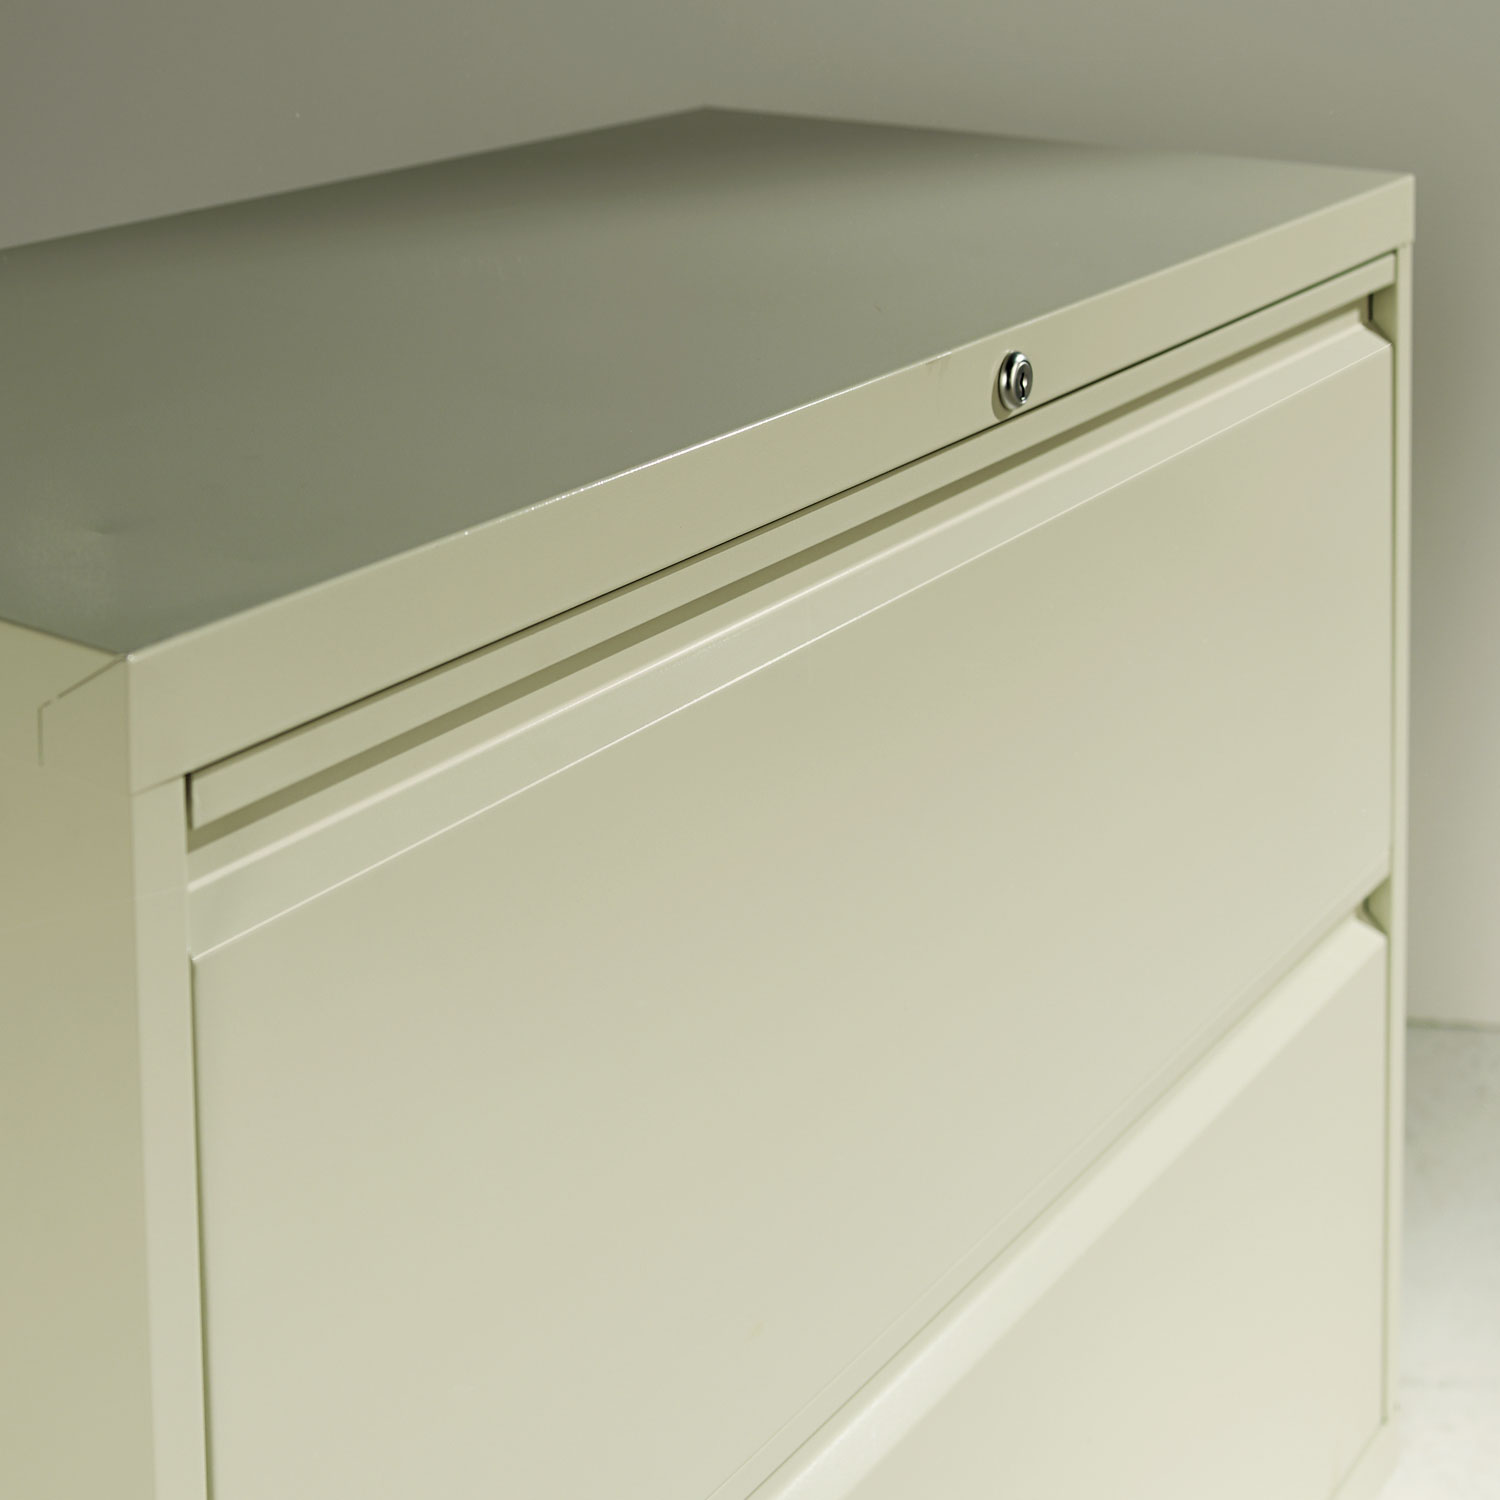 Four-Drawer Lateral File Cabinet, 36w x 19-1/4d x 53-1/4h, Light Gray